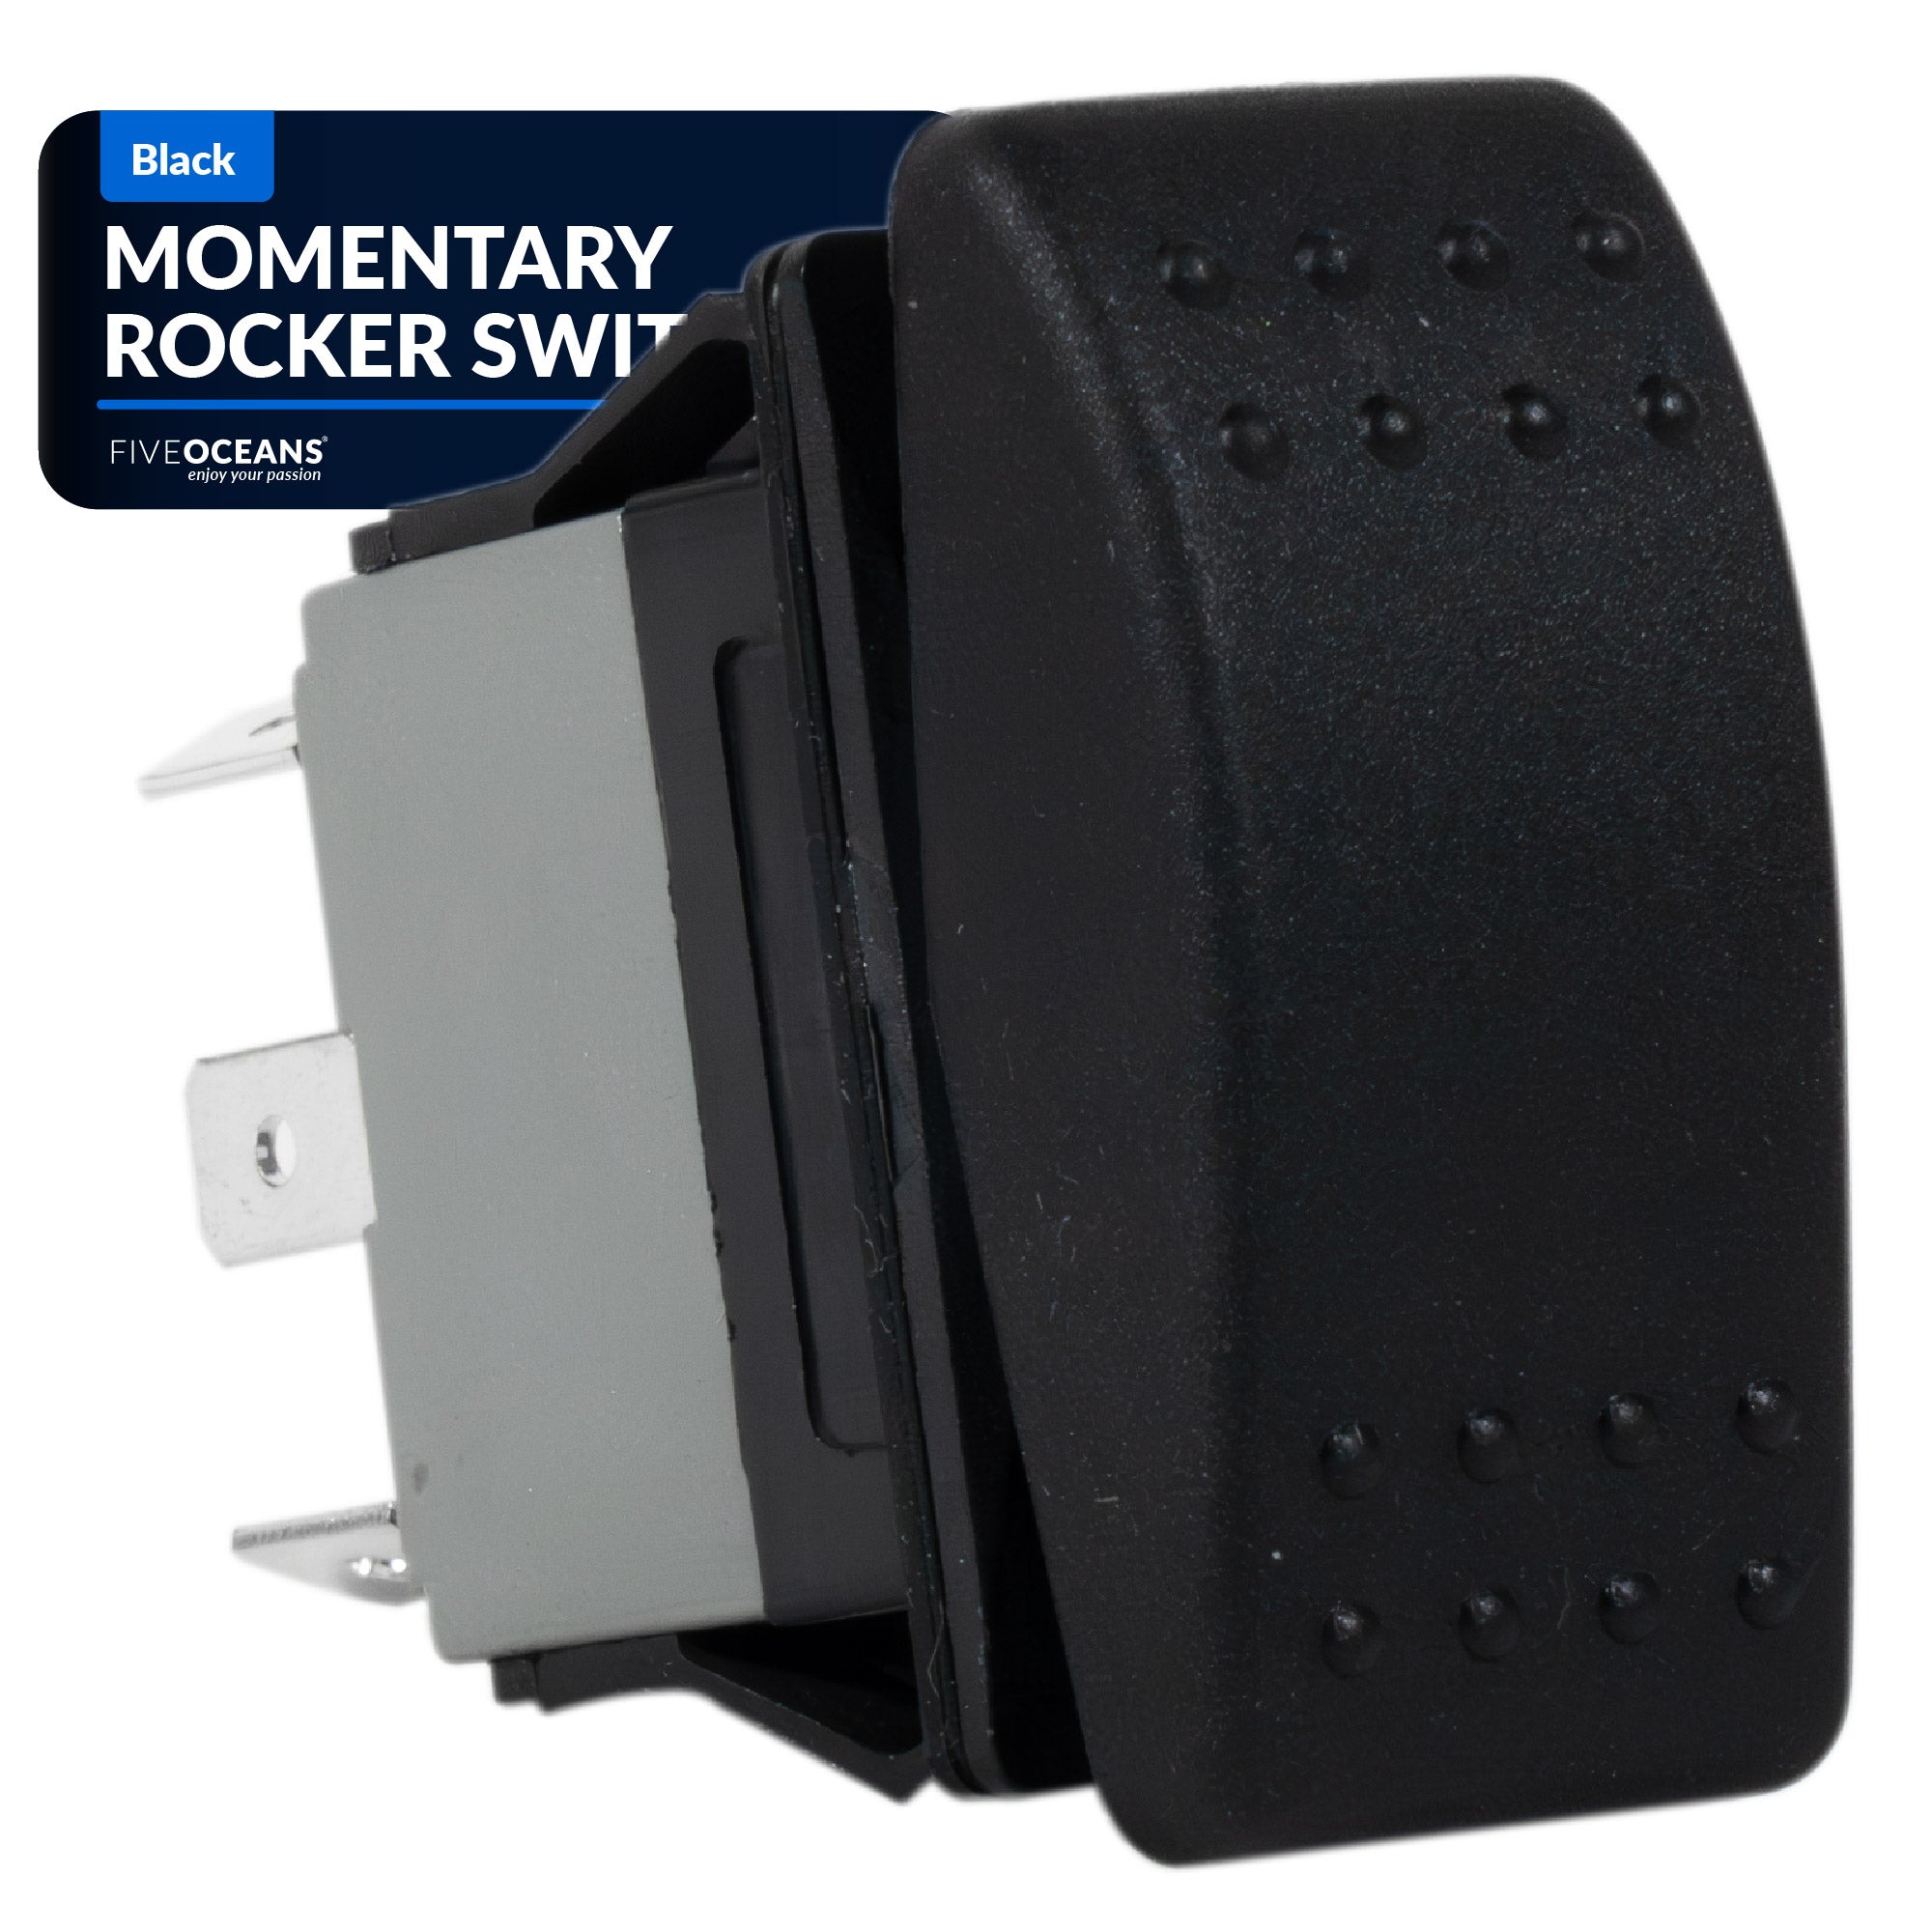 Momentary On-Off Rocker Switch - FO1528